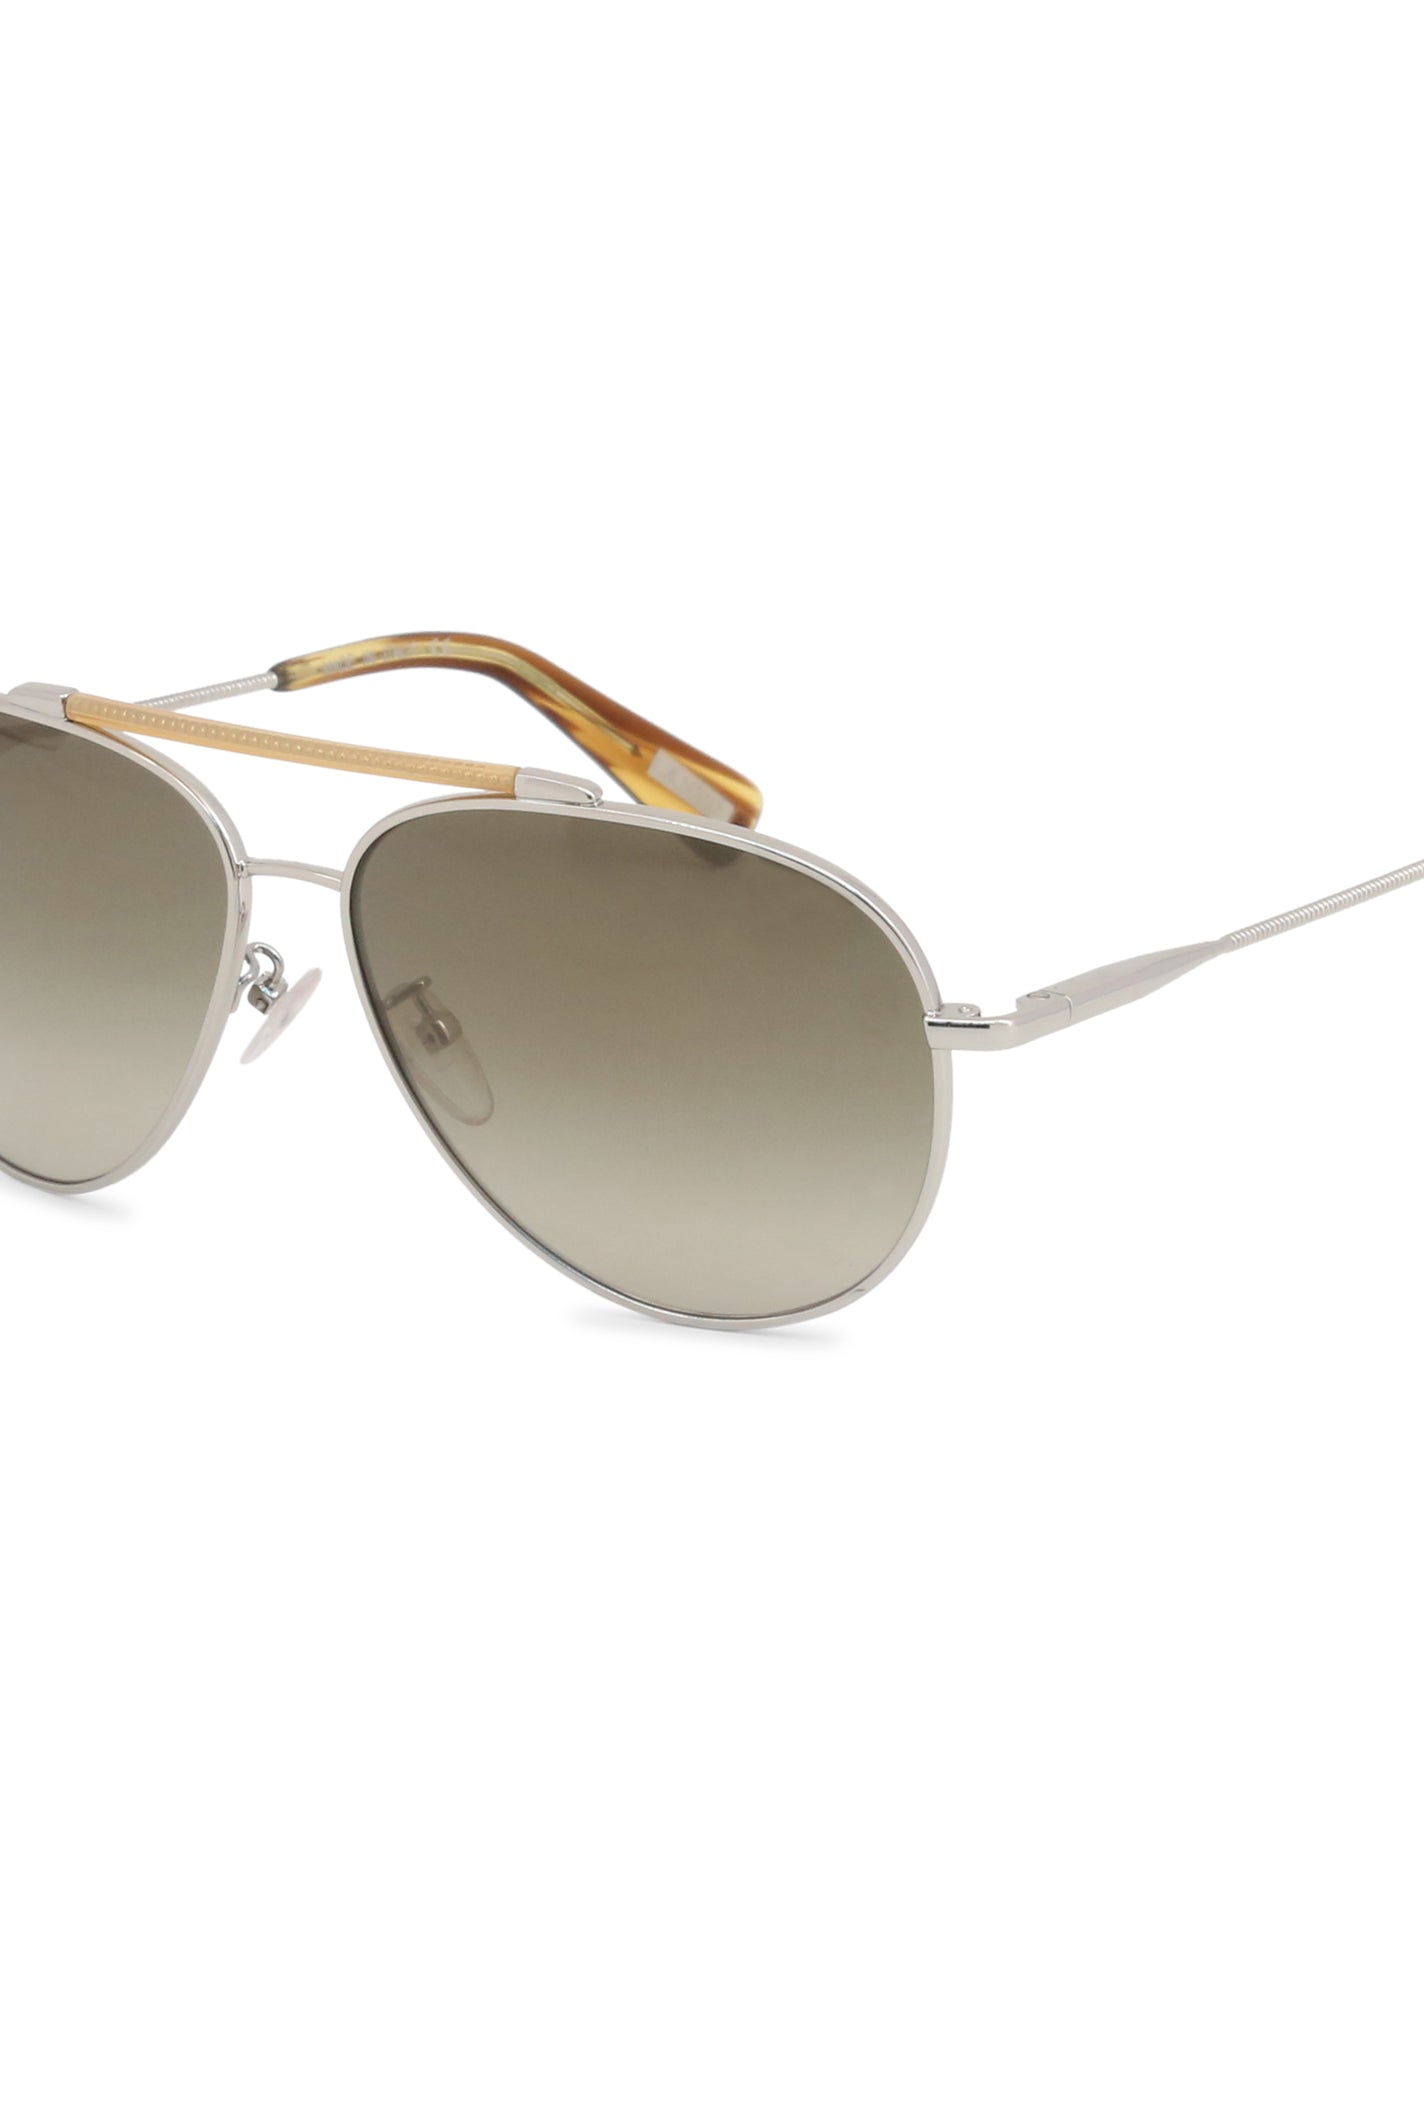 Lanvin - Silver & Natural Aviators - Lanvin - [product type] - Magpie Style